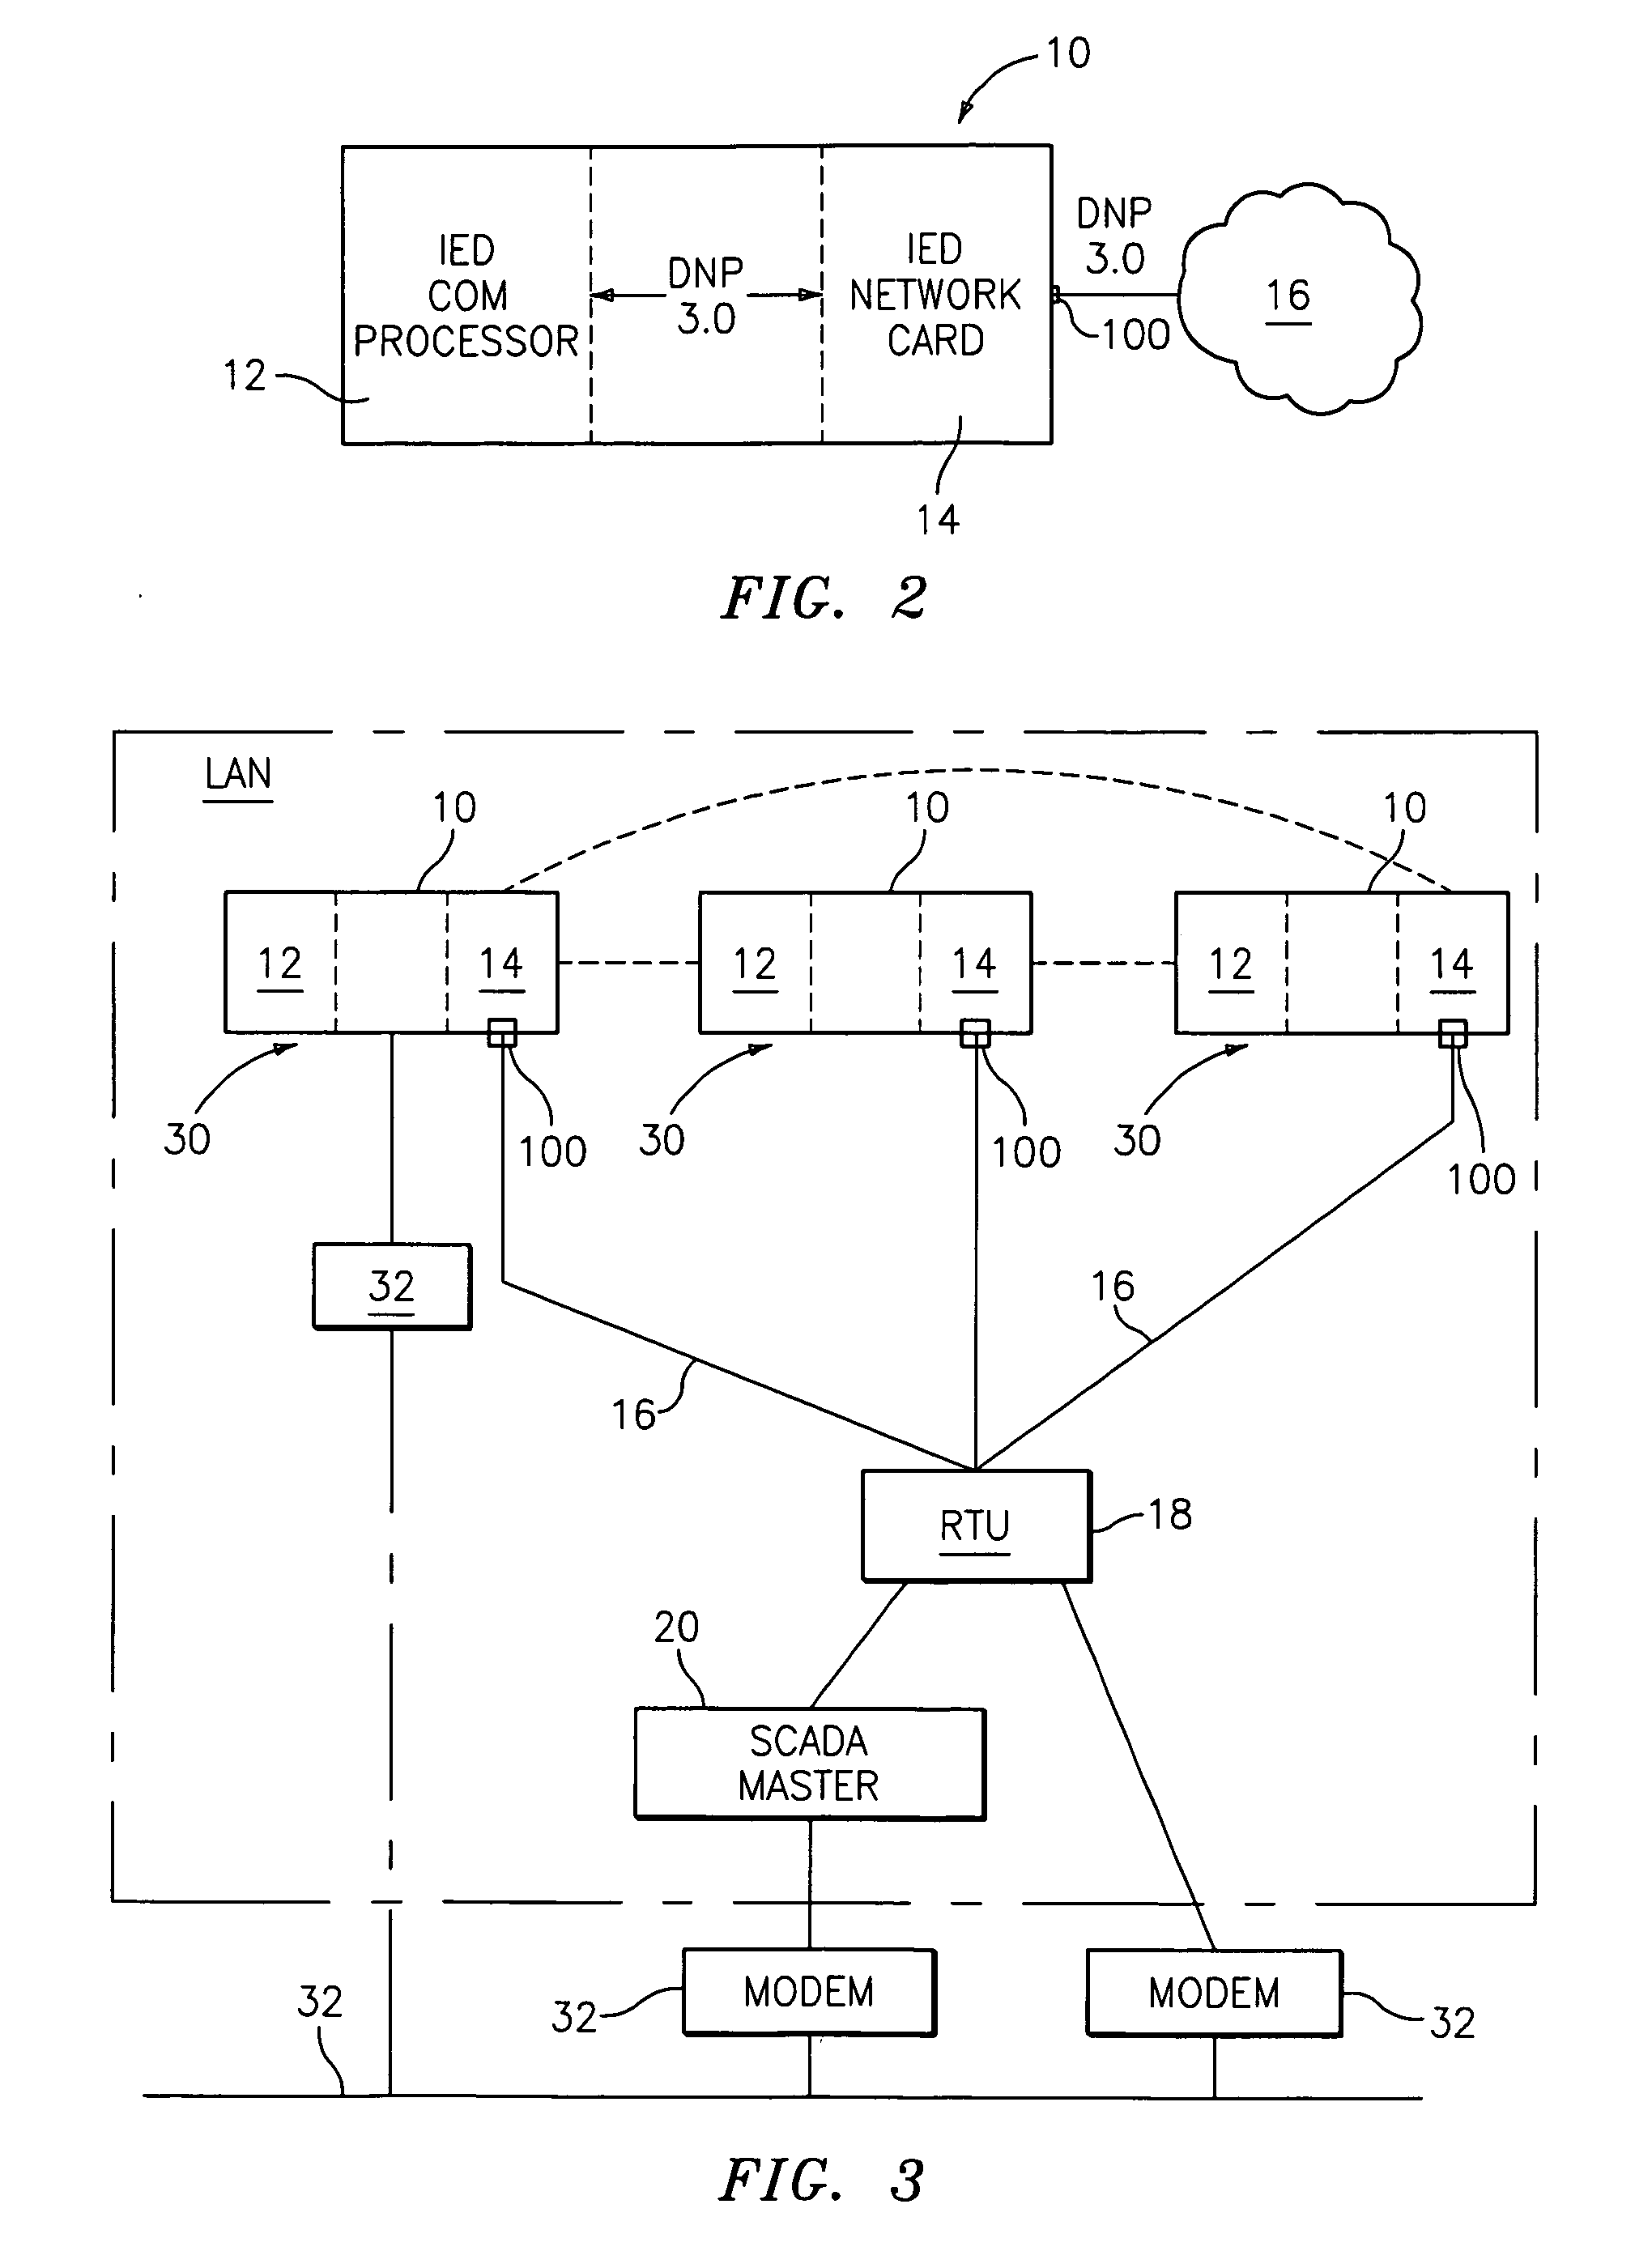 System and method for simultaneous communication on modbus and DNP 3.0 over Ethernet for electronic power meter